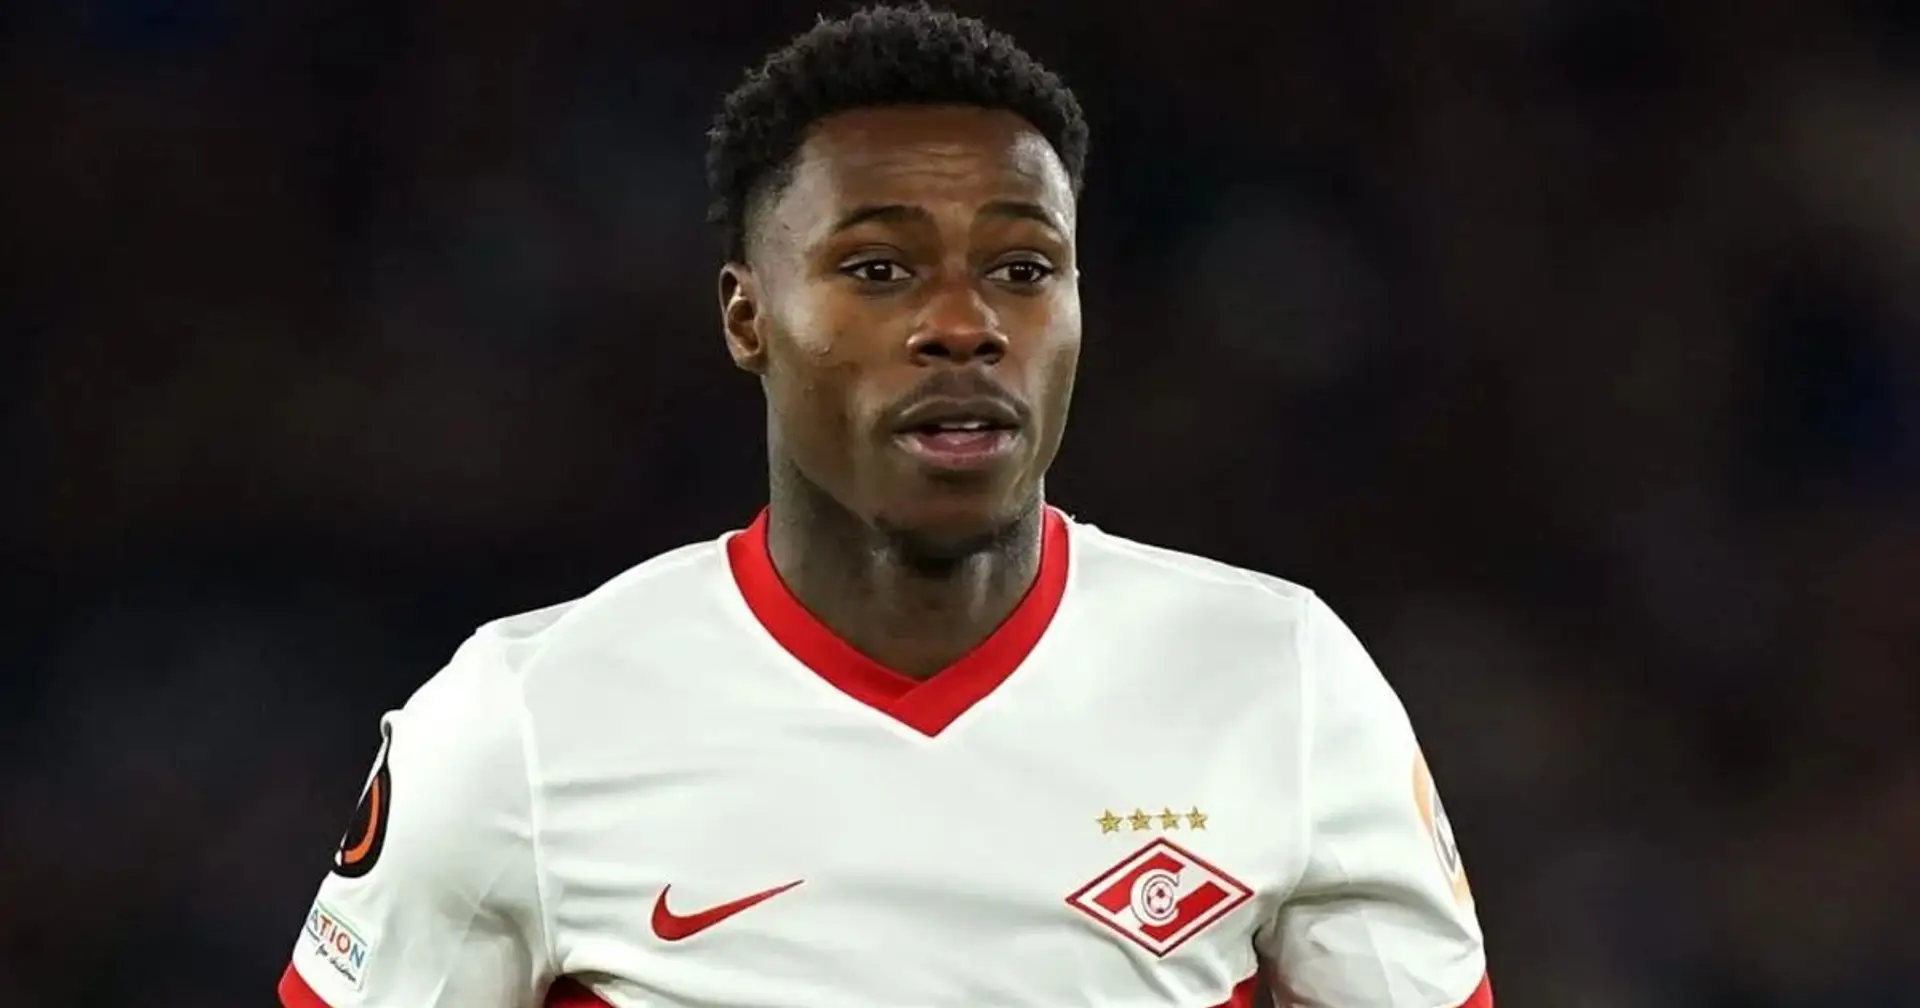 Former Ajax forward Quincy Promes suspected of drug trafficking, prosecuted for attempted manslaughter